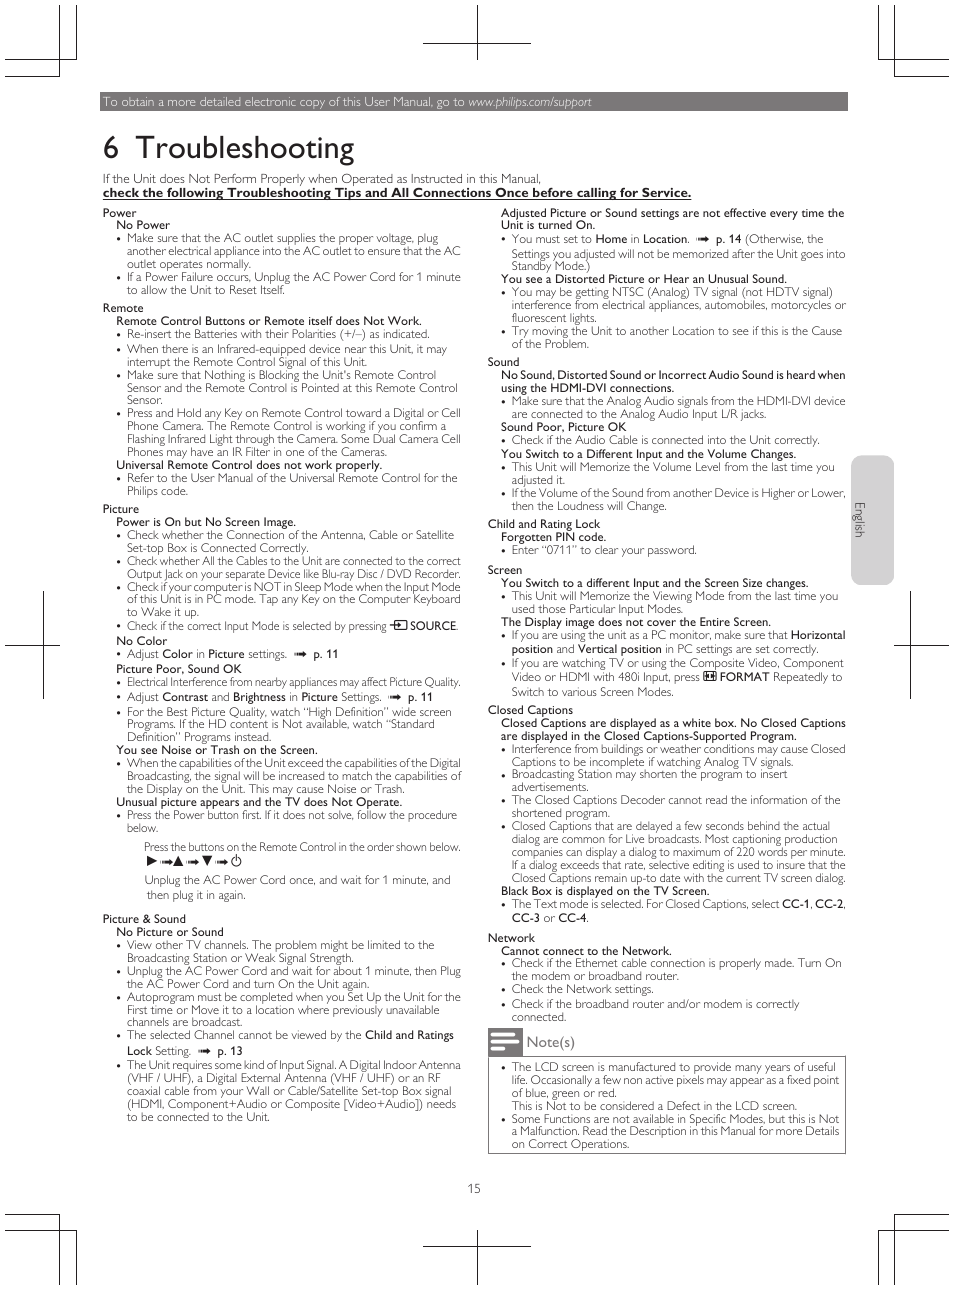 6 troubleshooting | Philips 49PFL4909-F7 User Manual | Page 15 / 19